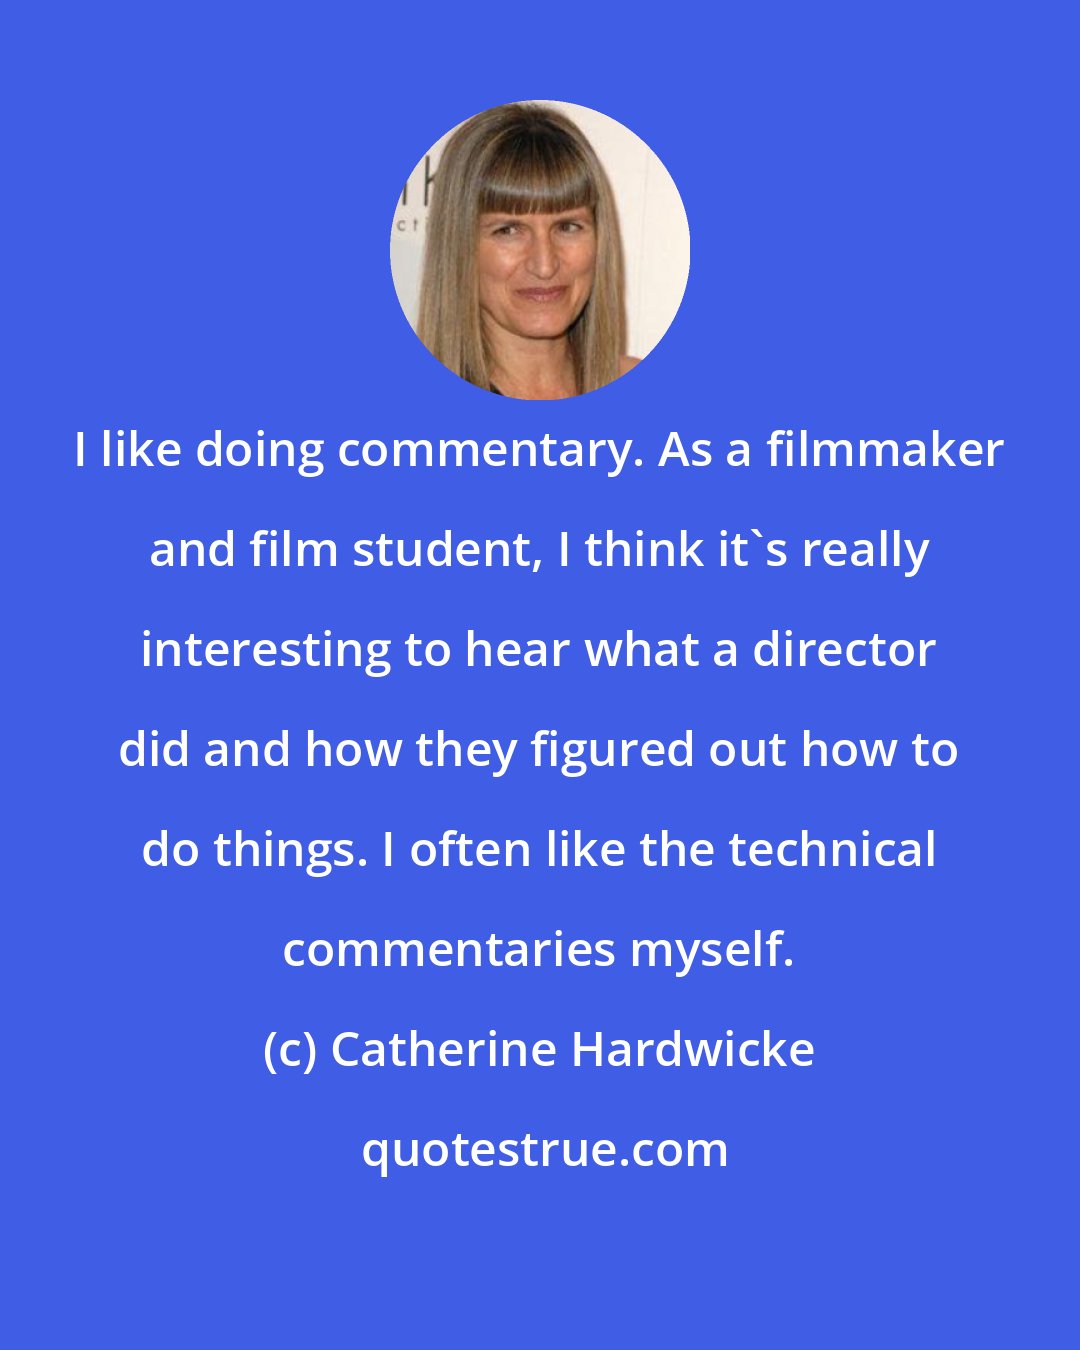 Catherine Hardwicke: I like doing commentary. As a filmmaker and film student, I think it's really interesting to hear what a director did and how they figured out how to do things. I often like the technical commentaries myself.